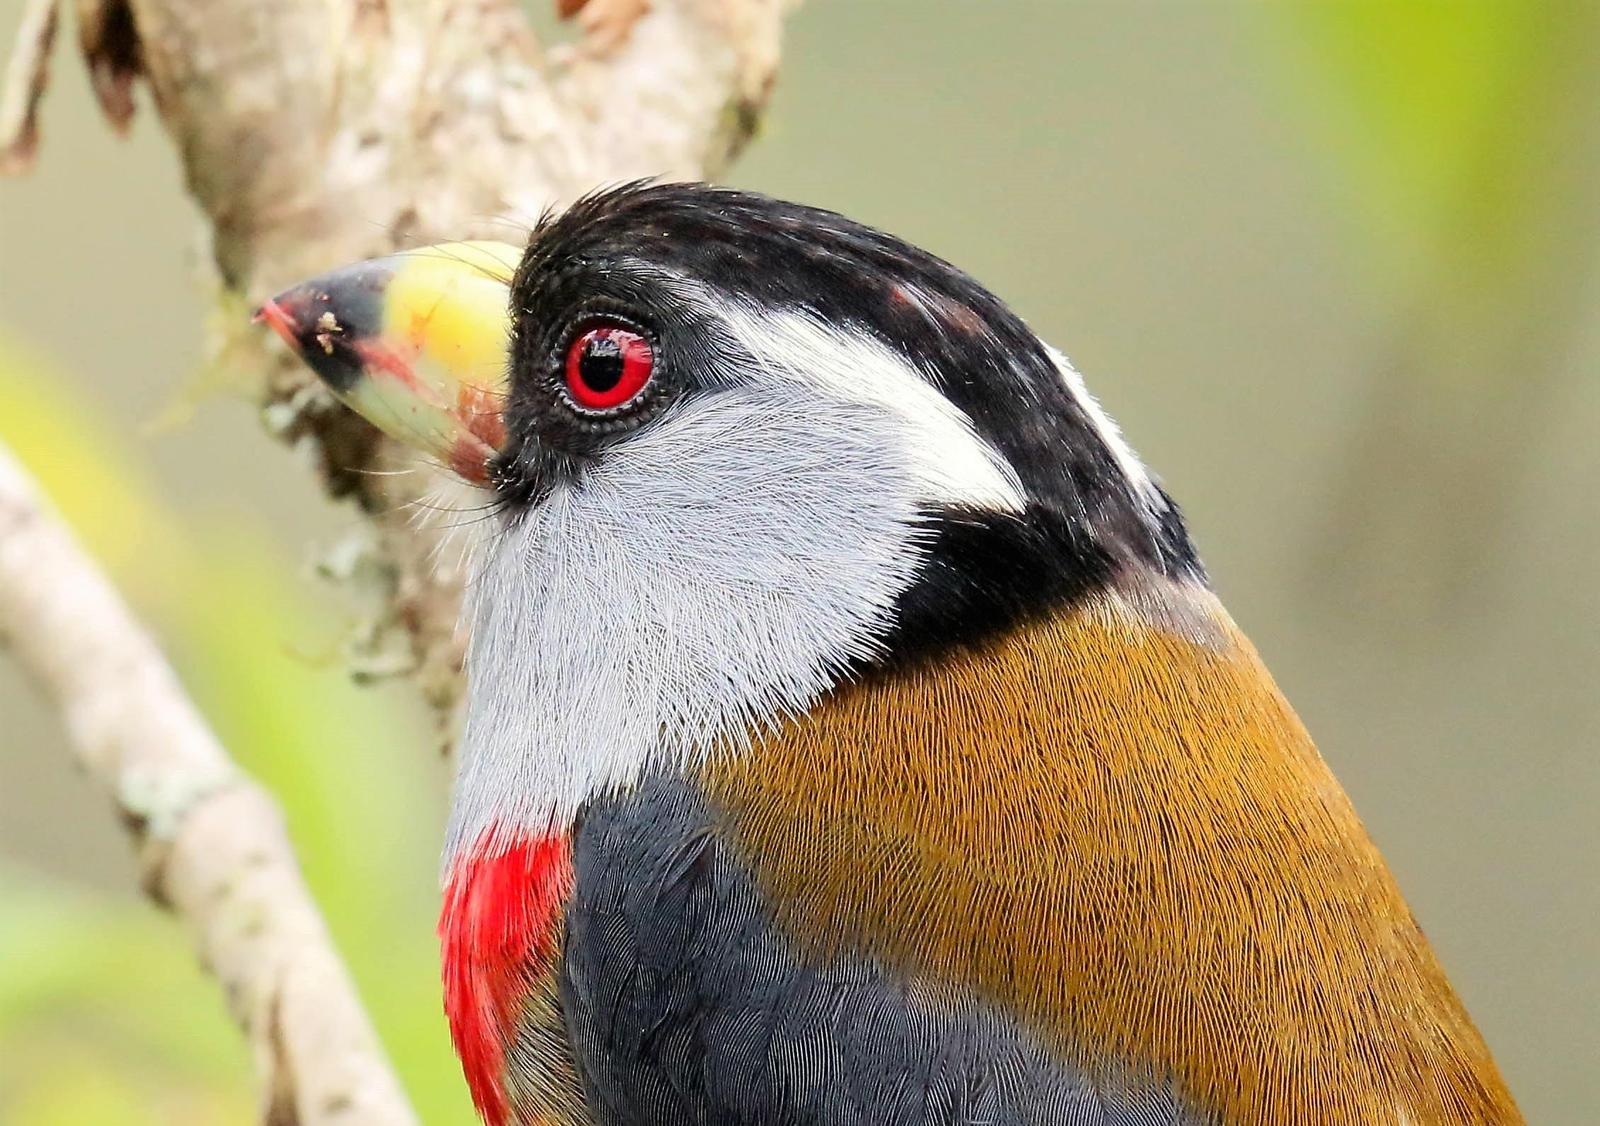 Toucan Barbet Photo by Thomas Driscoll